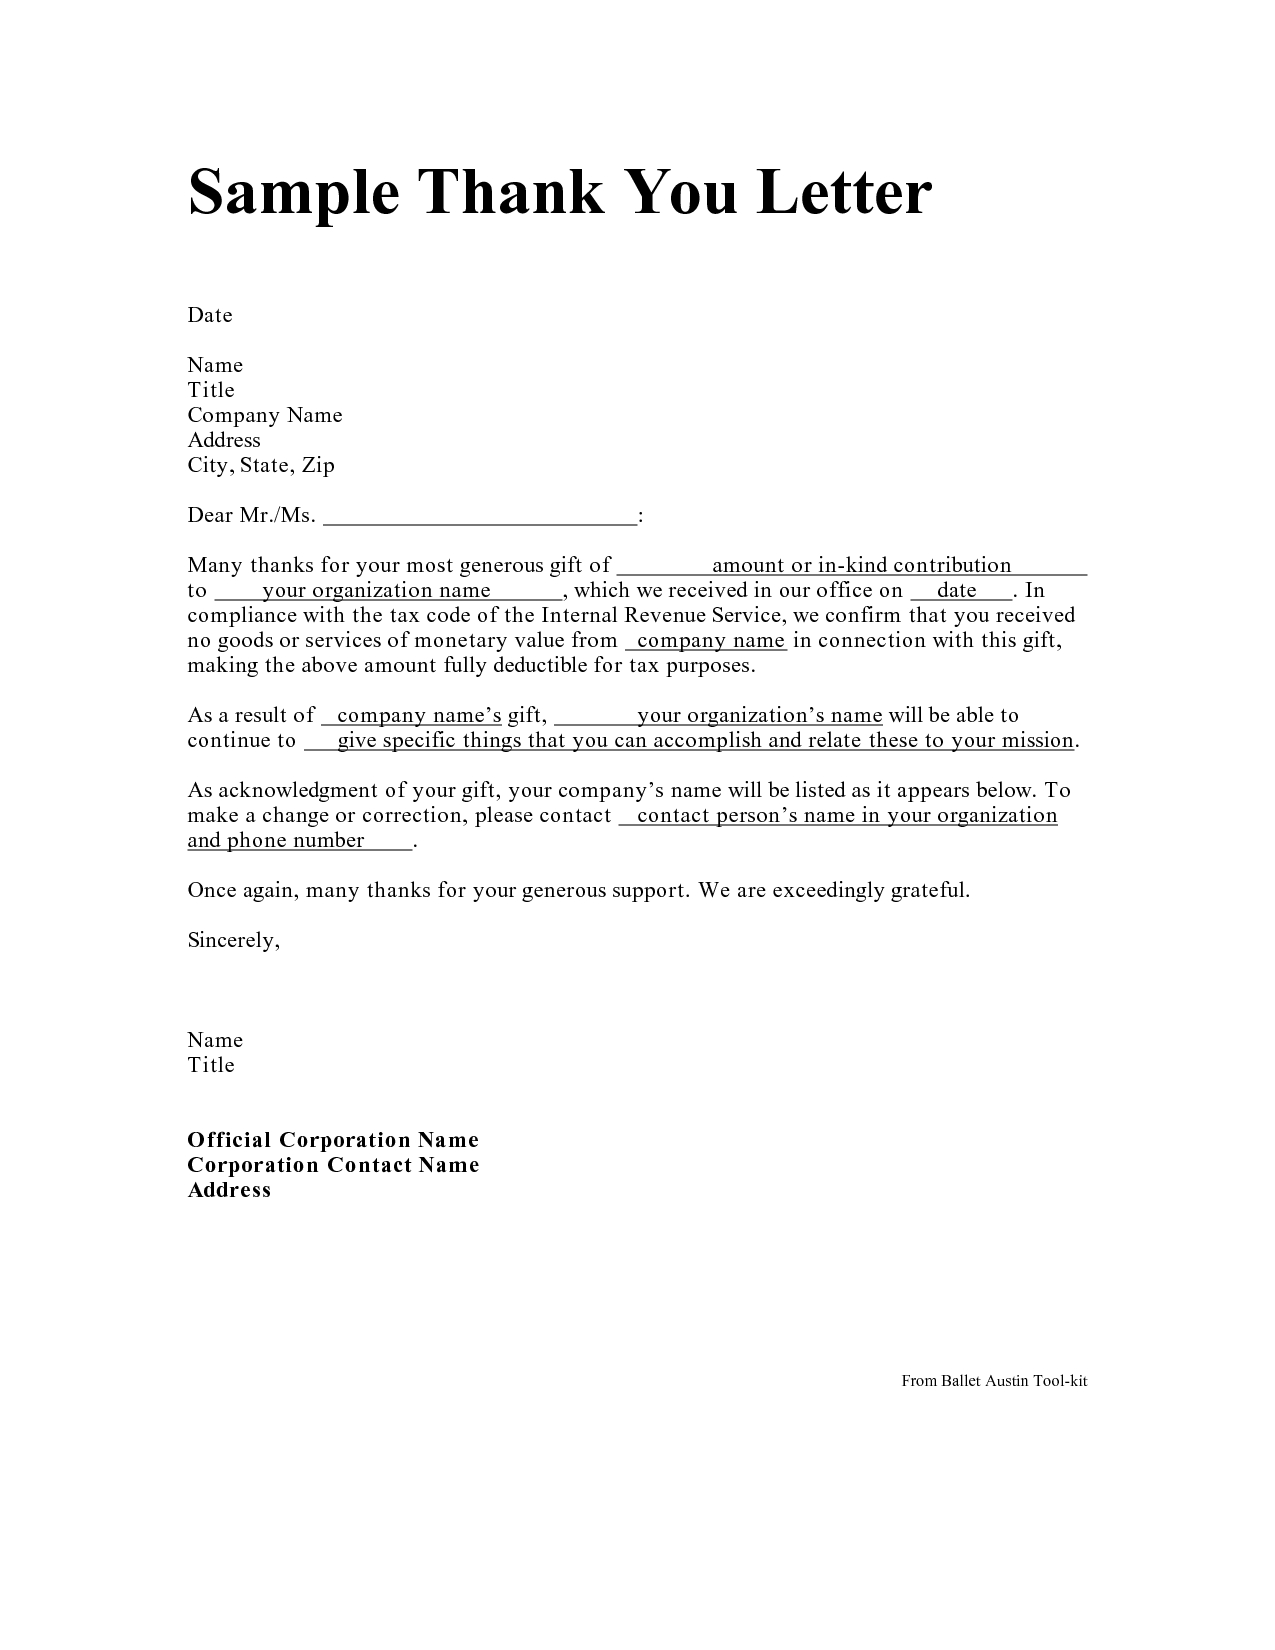 Ministry Support Letter Template - Personal Thank You Letter Personal Thank You Letter Samples